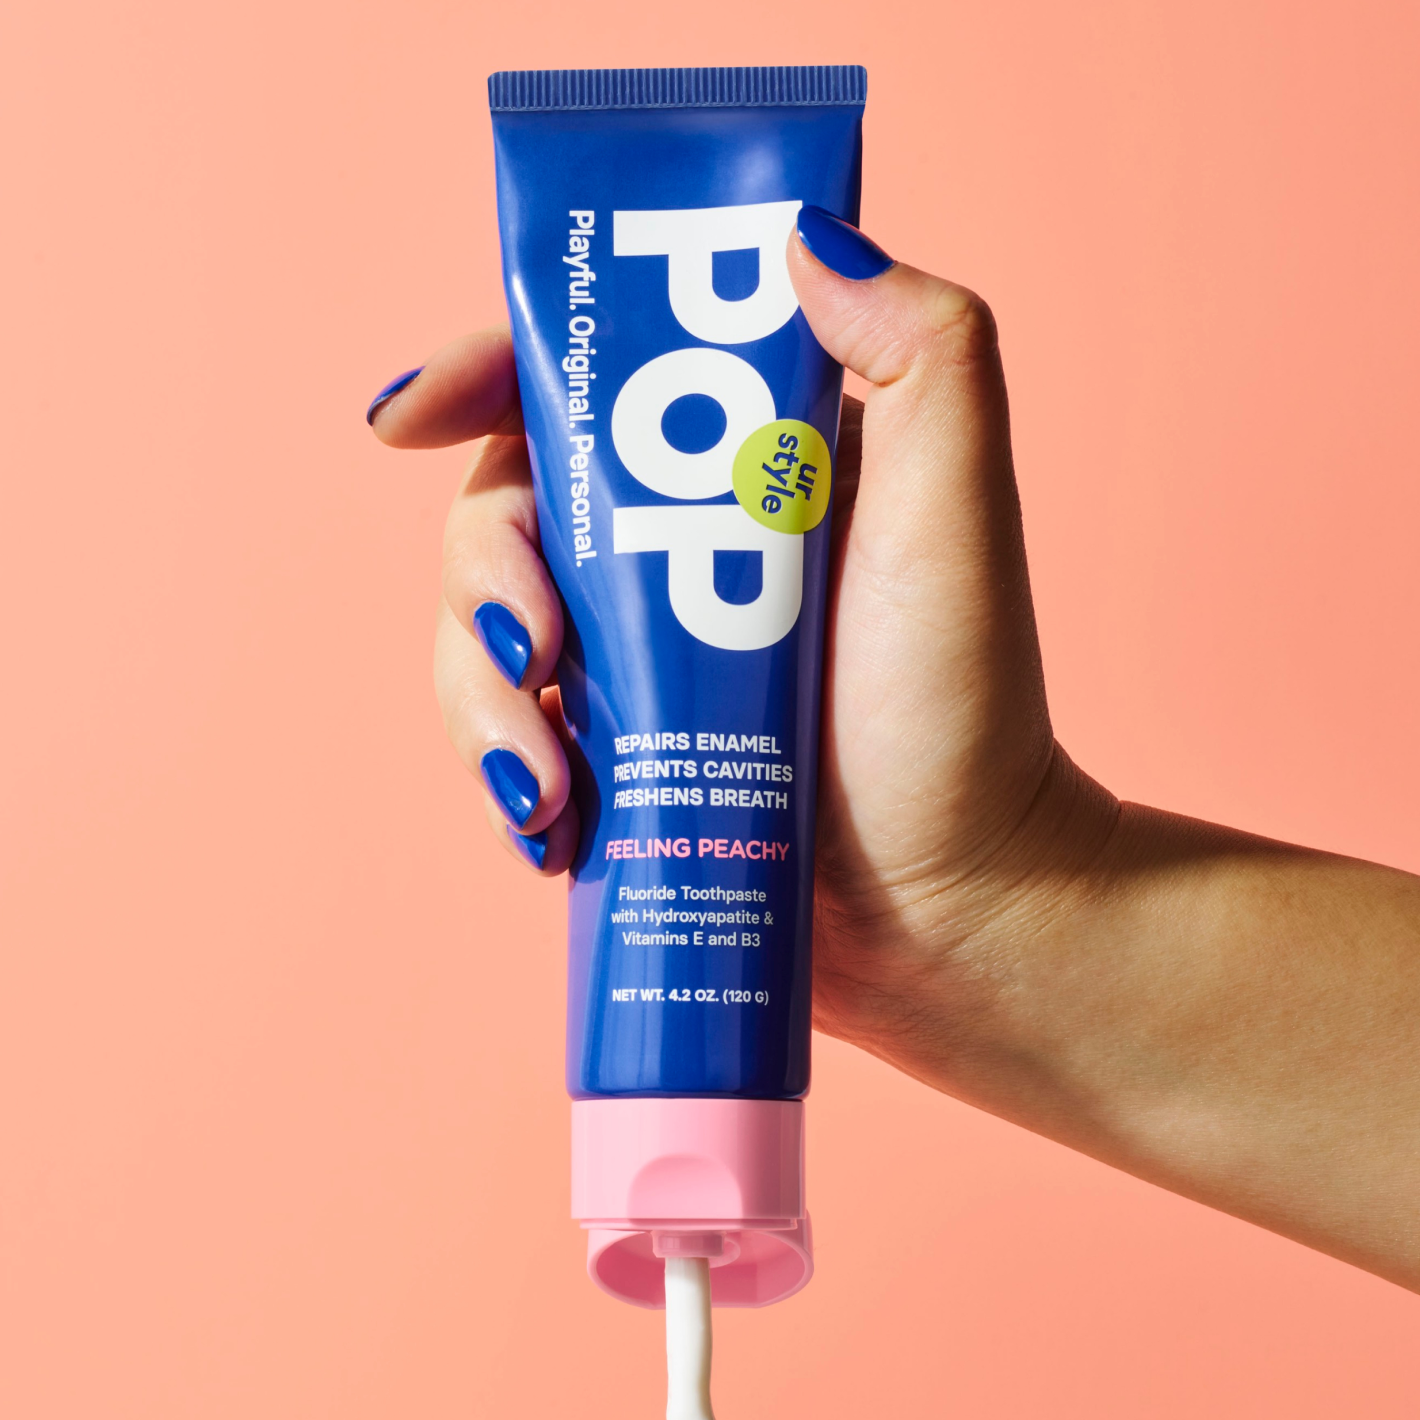 A hand with blue-painted nails holding a blue tube of POP Feeling Peachy Toothpaste with a pink cap on a peach surface